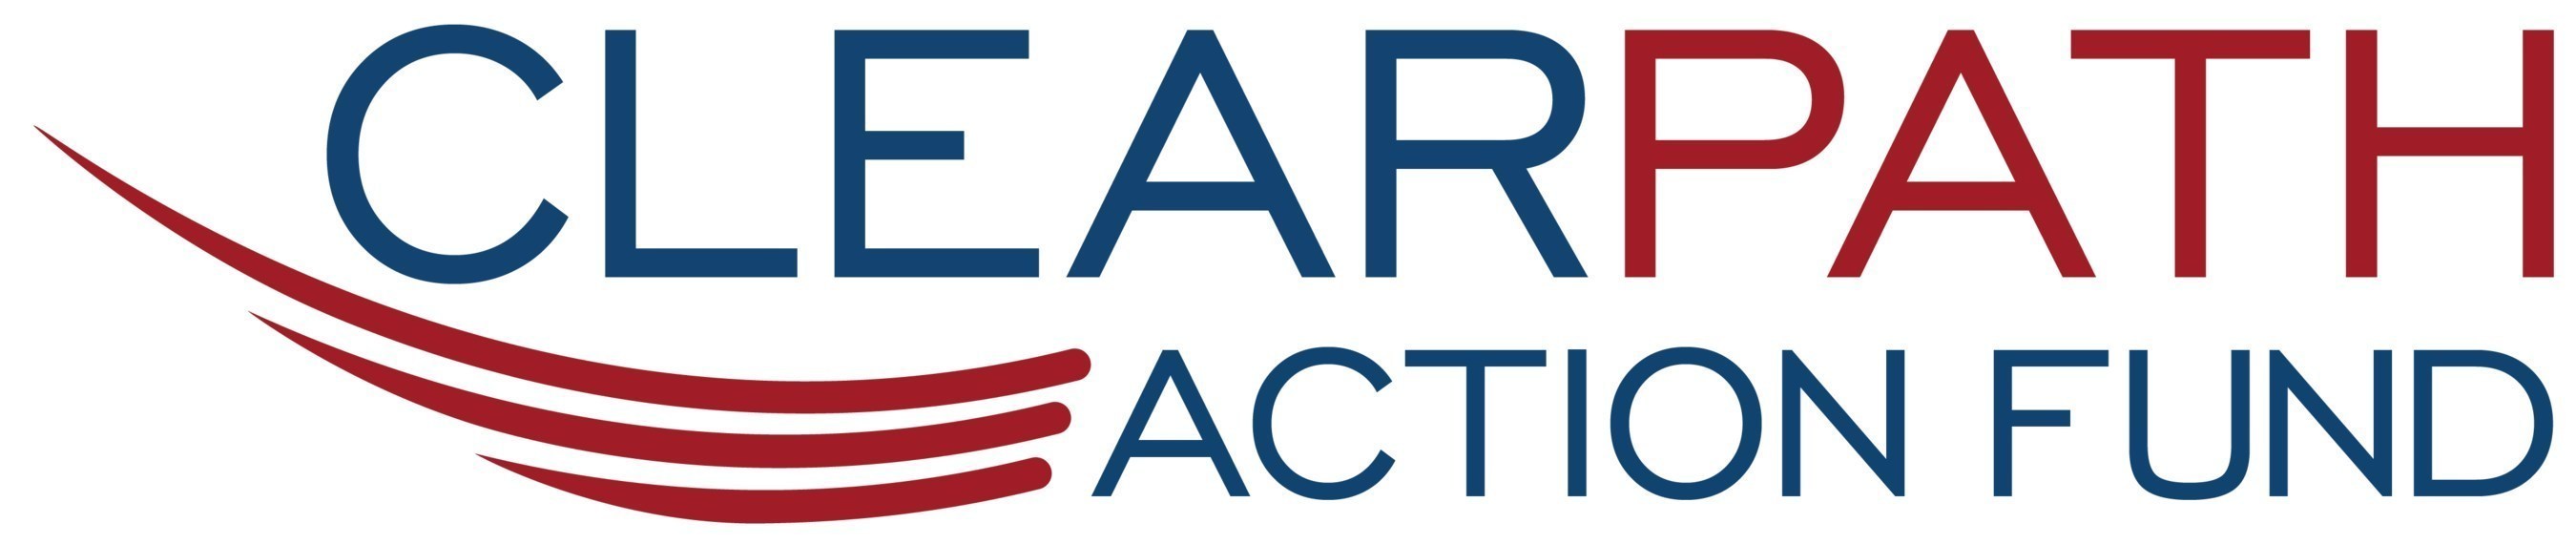 ClearPath Action Fund (PRNewsFoto/ClearPath Action Fund)